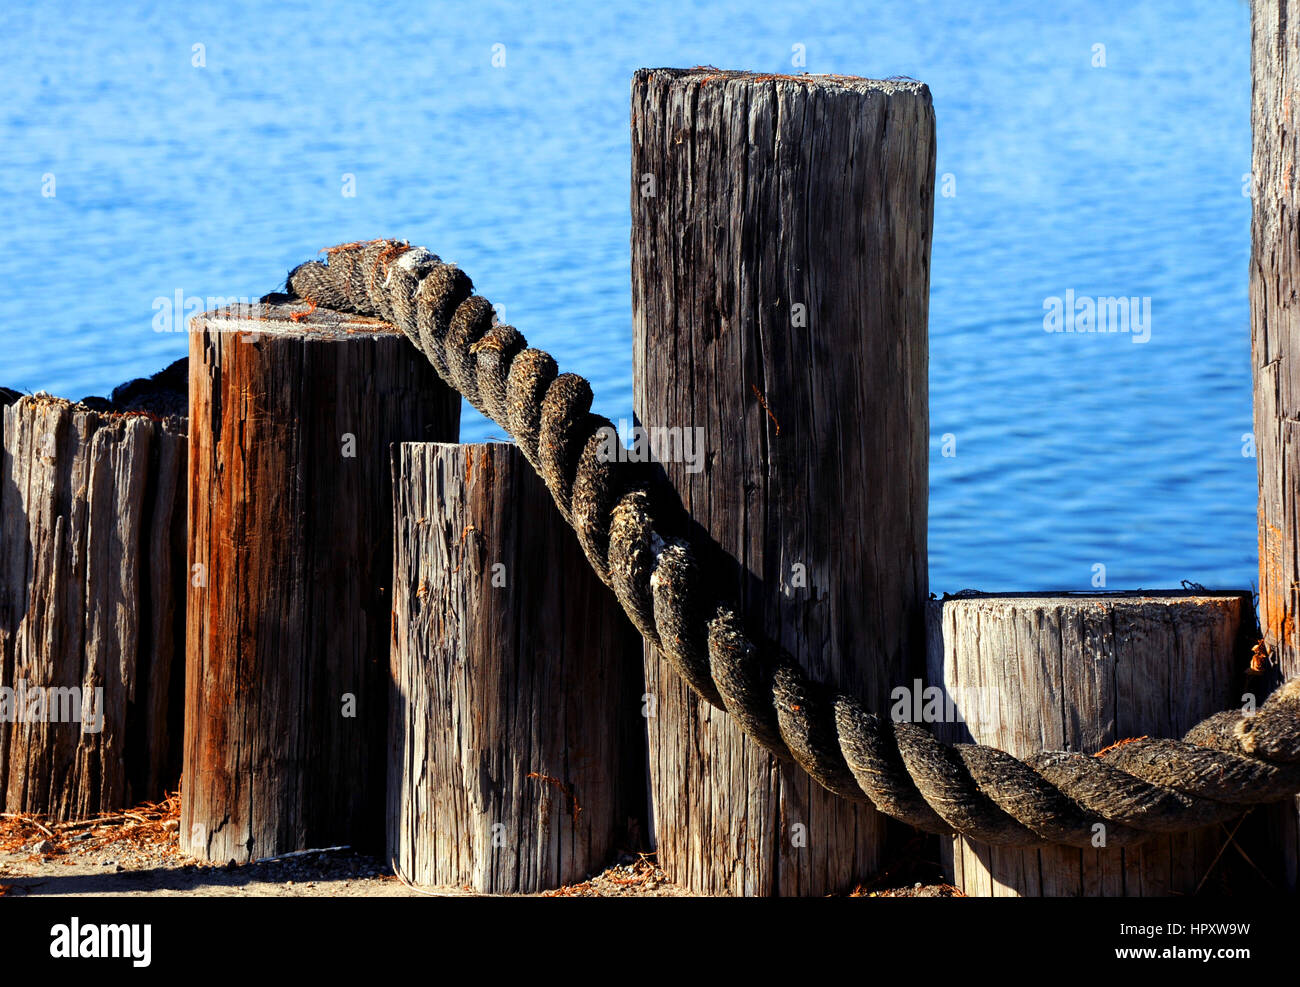 Dock pilings, in varying heights, form barrier between land and sea.  Thick twisted rope lays across wooden fence. Stock Photo